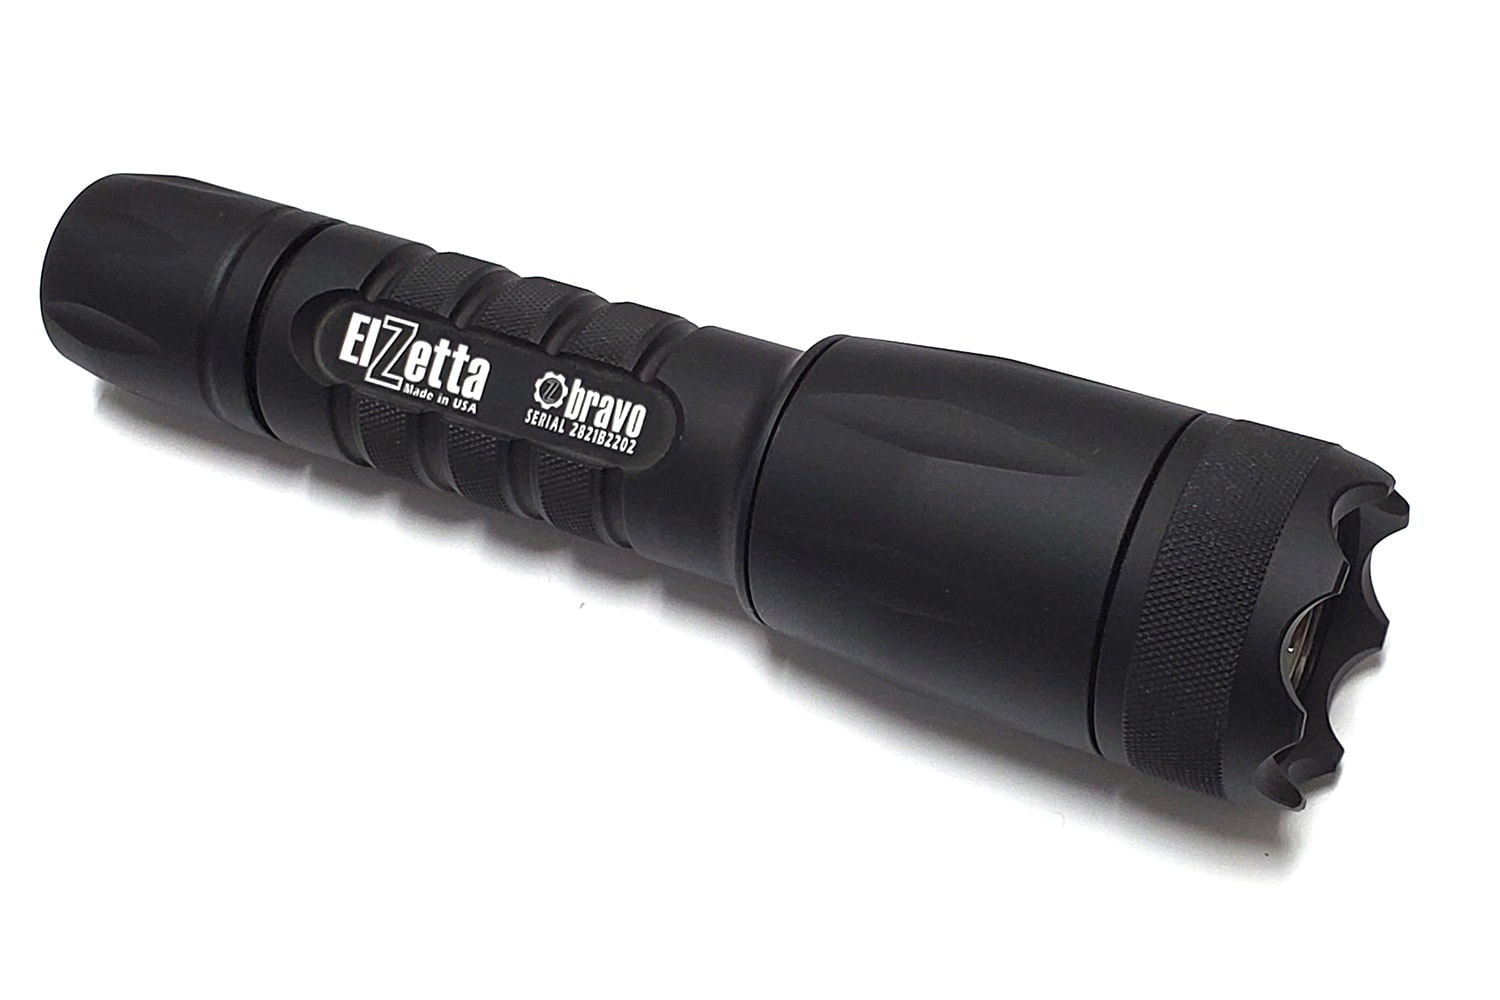 Elzetta Bravo High Candela 2-Cell Flashlight with Crenelated Bezel and Rotary Tailcap